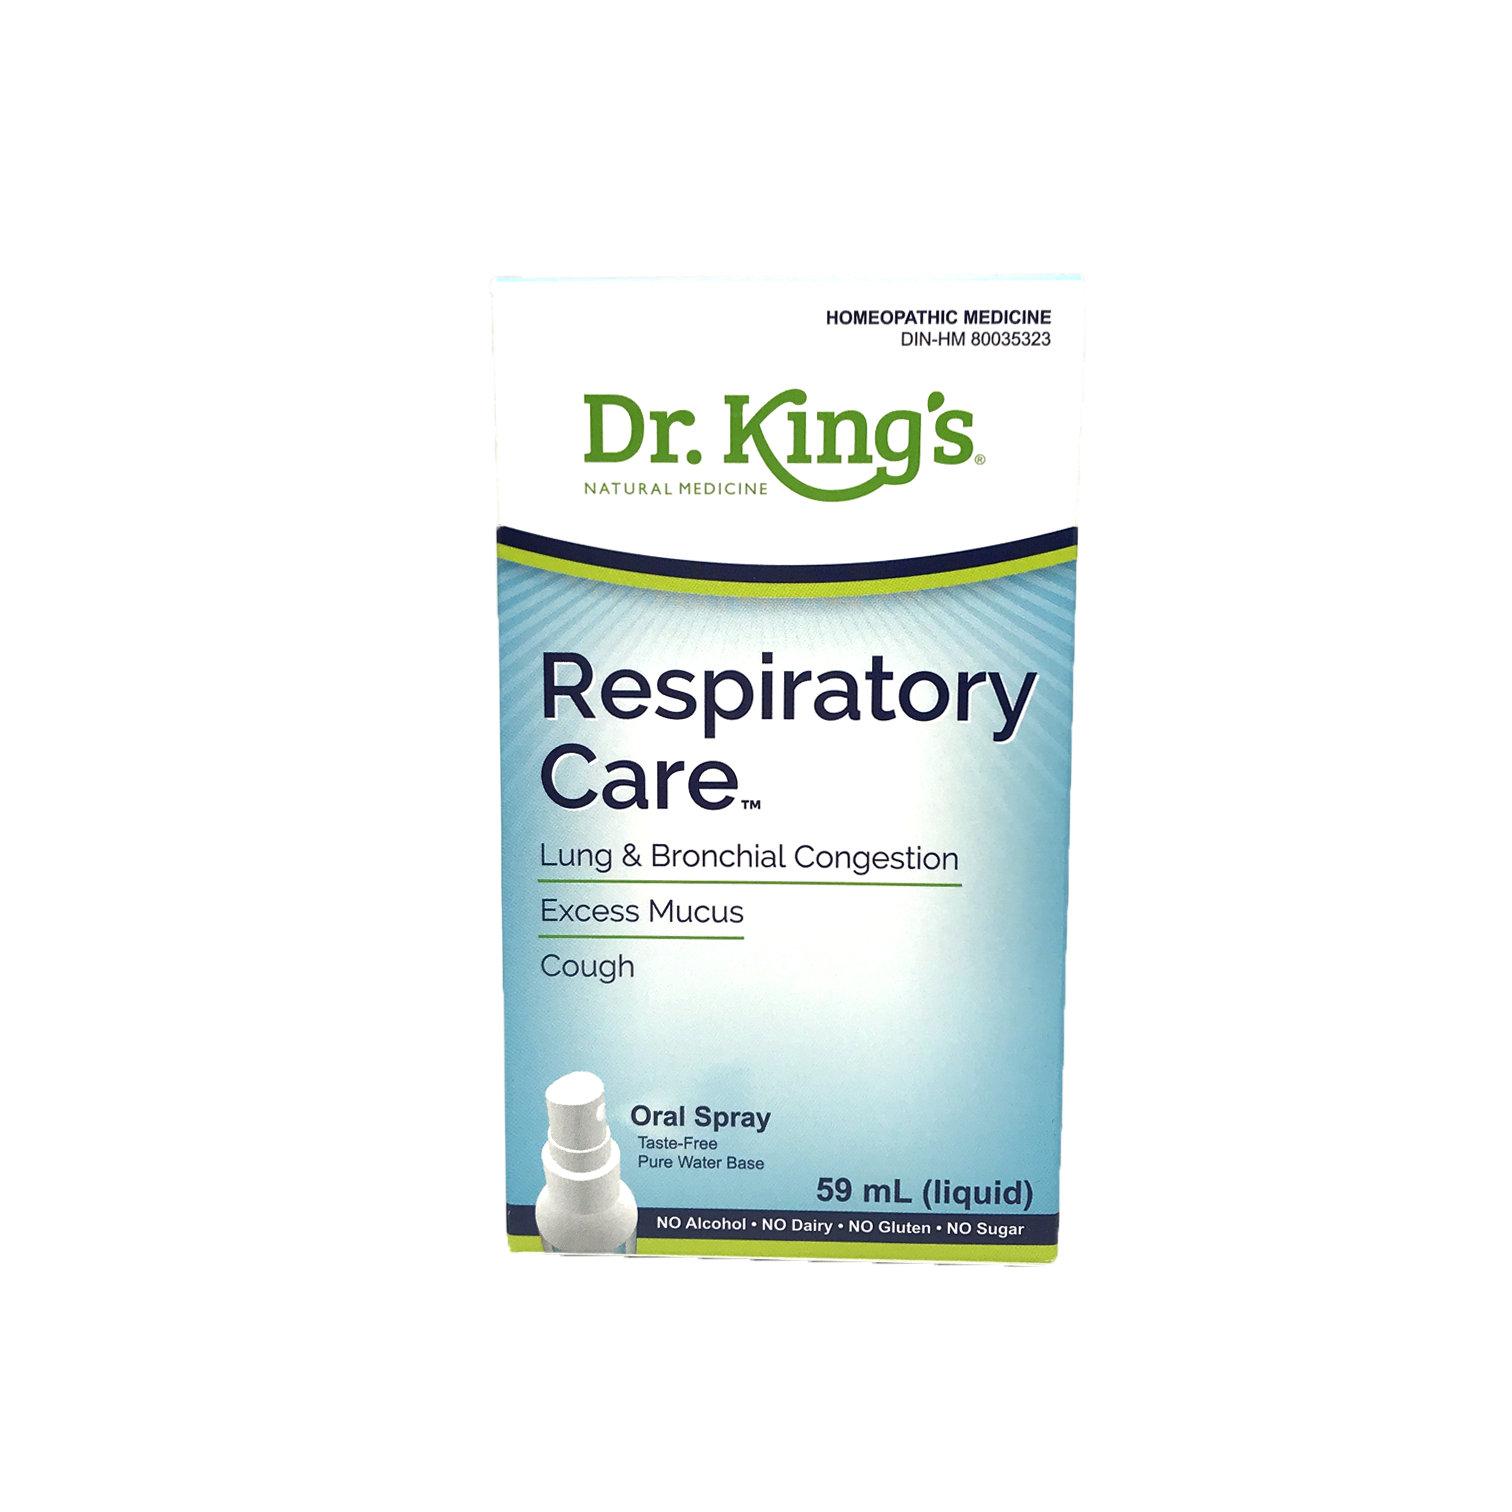 Dr. King’s Respiratory Care 59ml